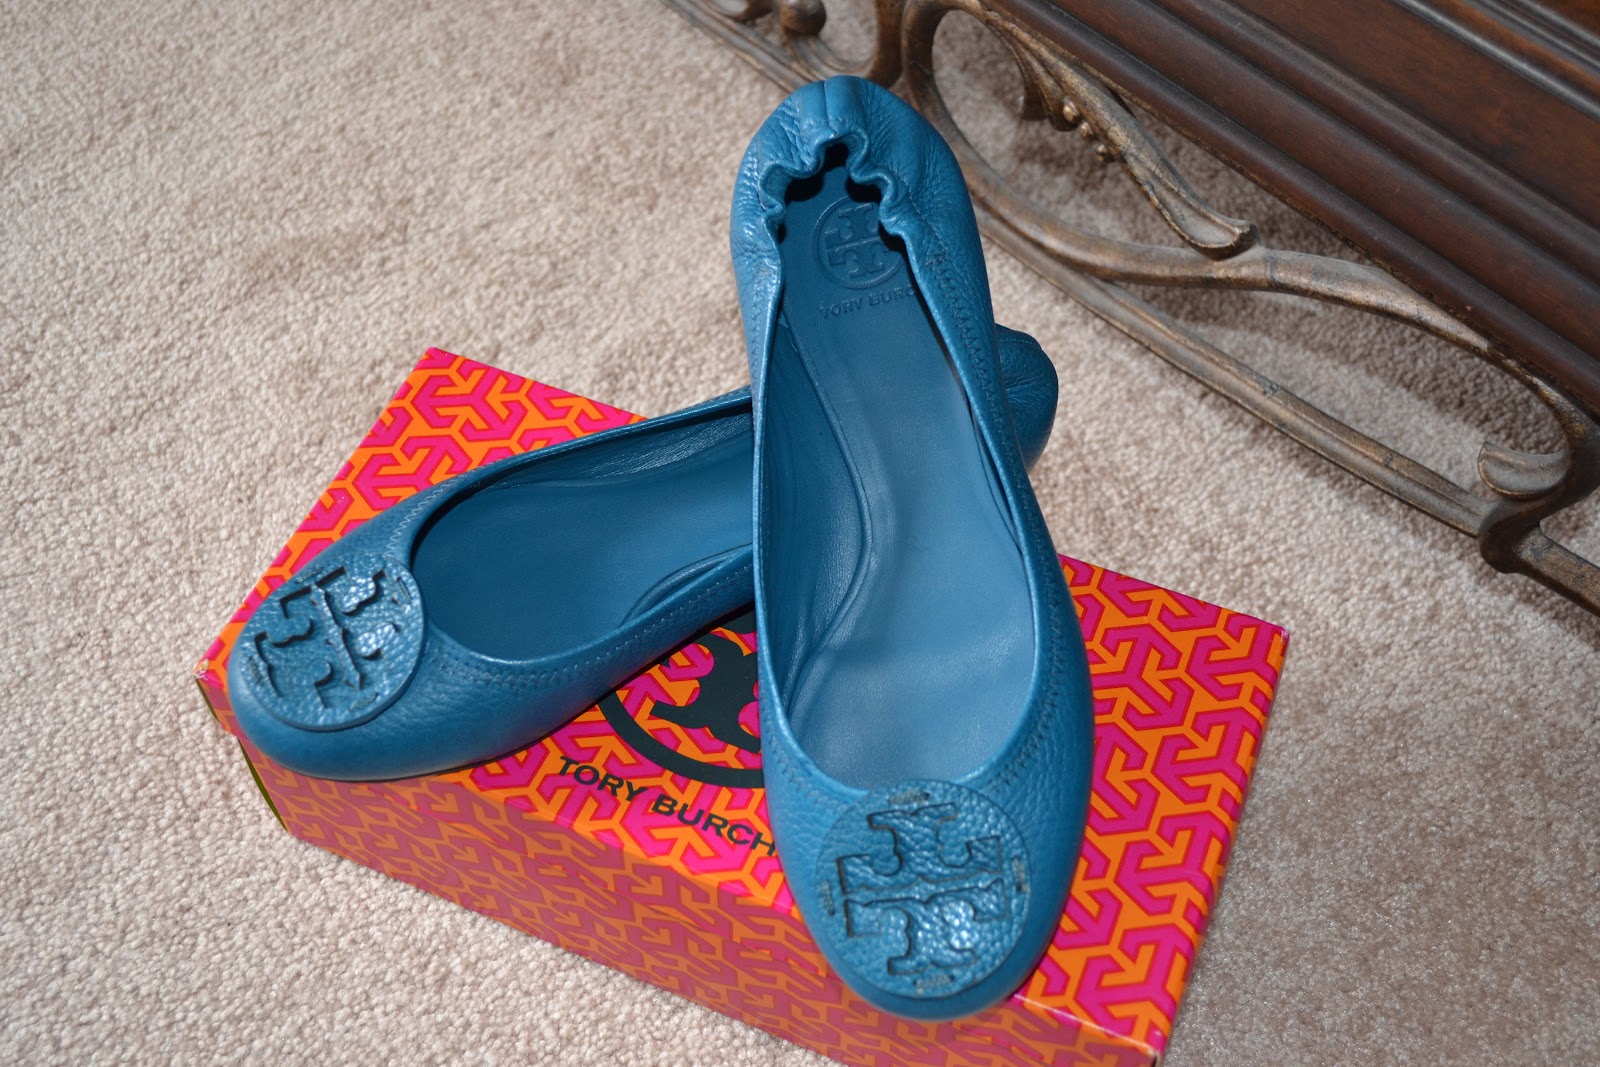 Mom's Got a Brand New Bag: New Shoes! Tory Burch Tumbled Leather Revas in  Peacock Blue